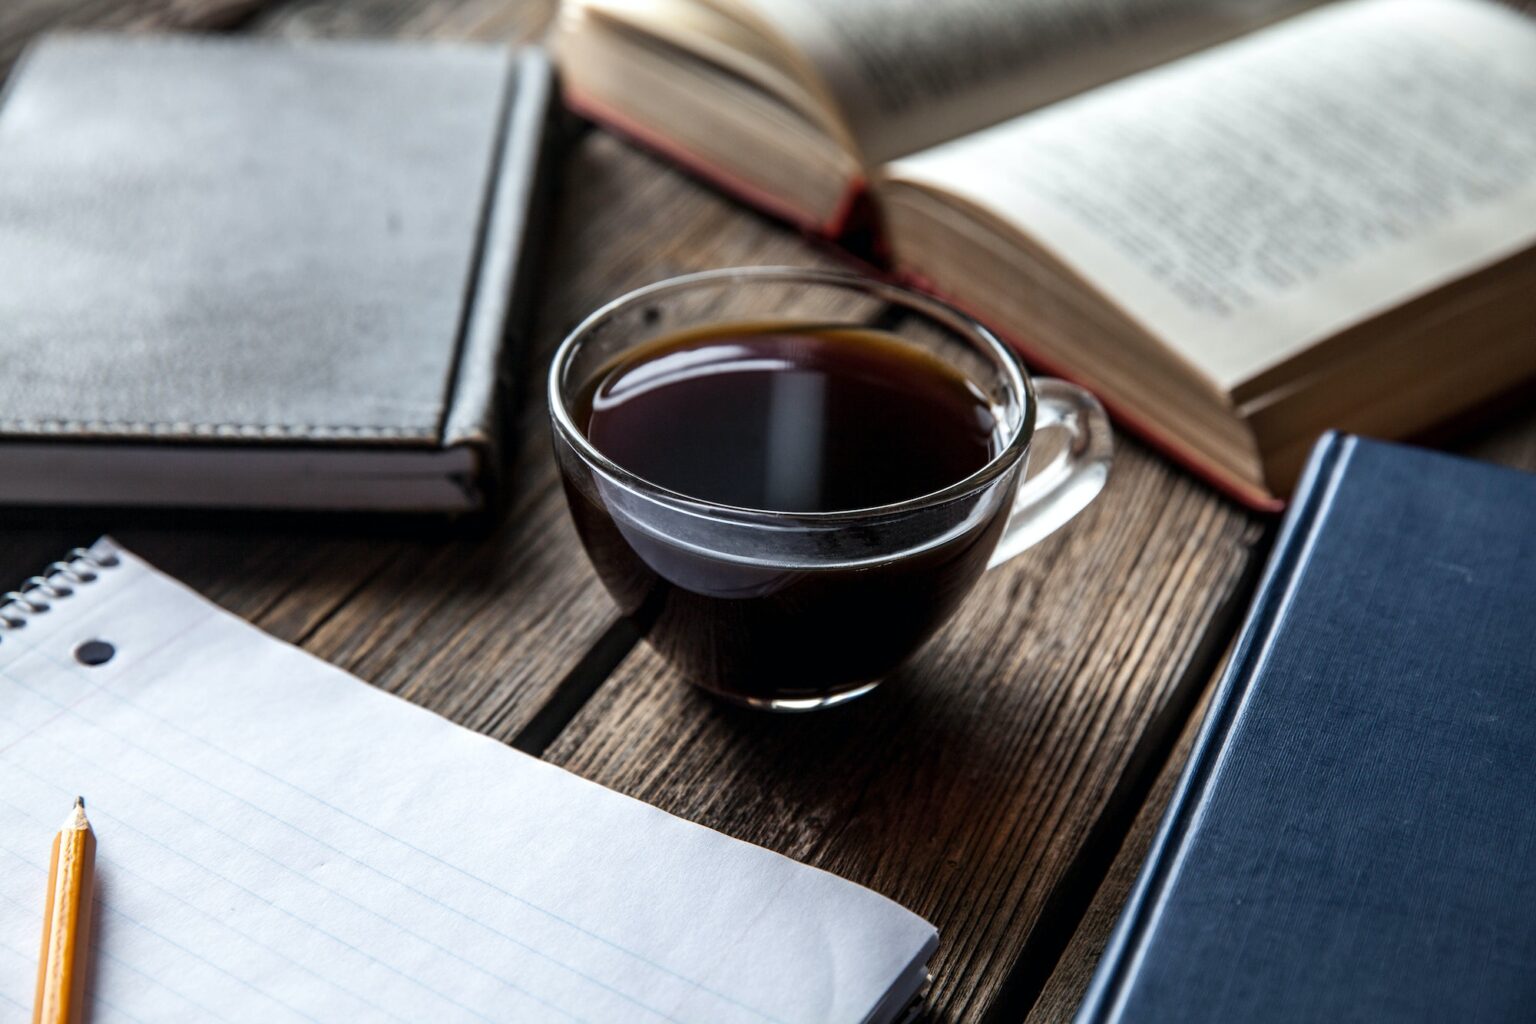 books and a cup of coffee on a wooden background